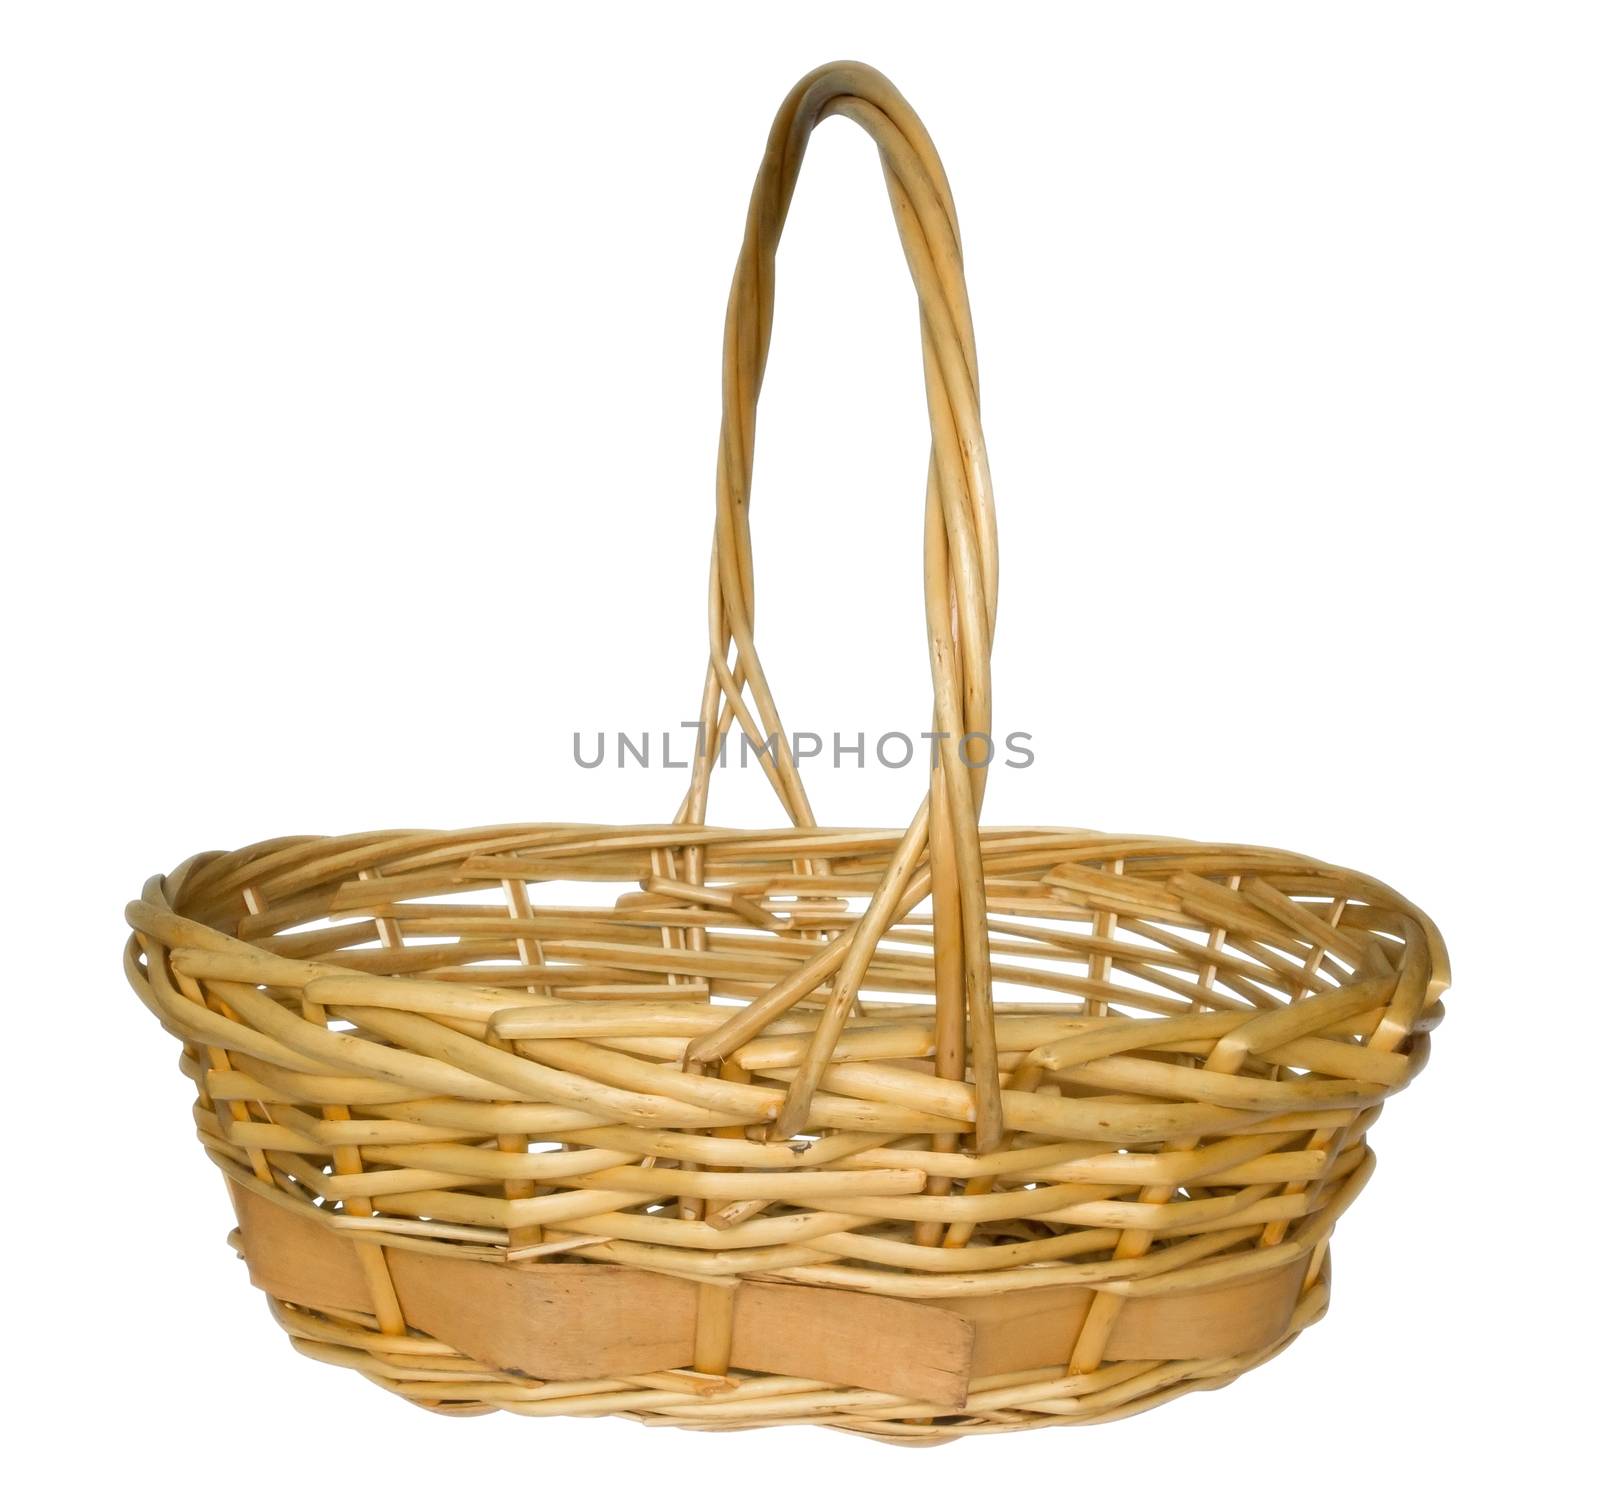 Wicker basket isolated on white background. Clipping path included.